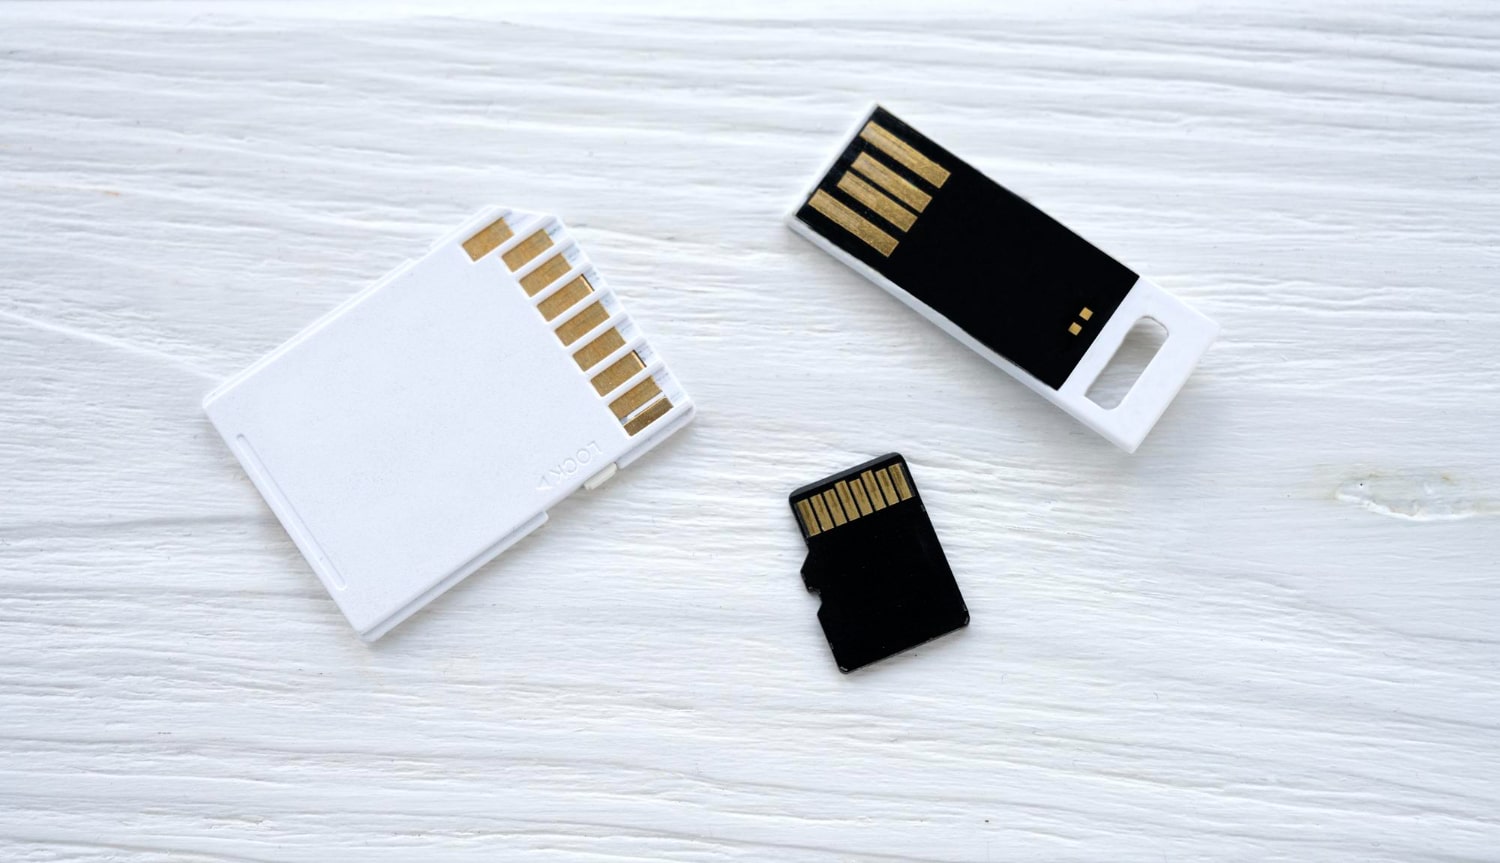 memory cards flash drives - gifts for employees under $10